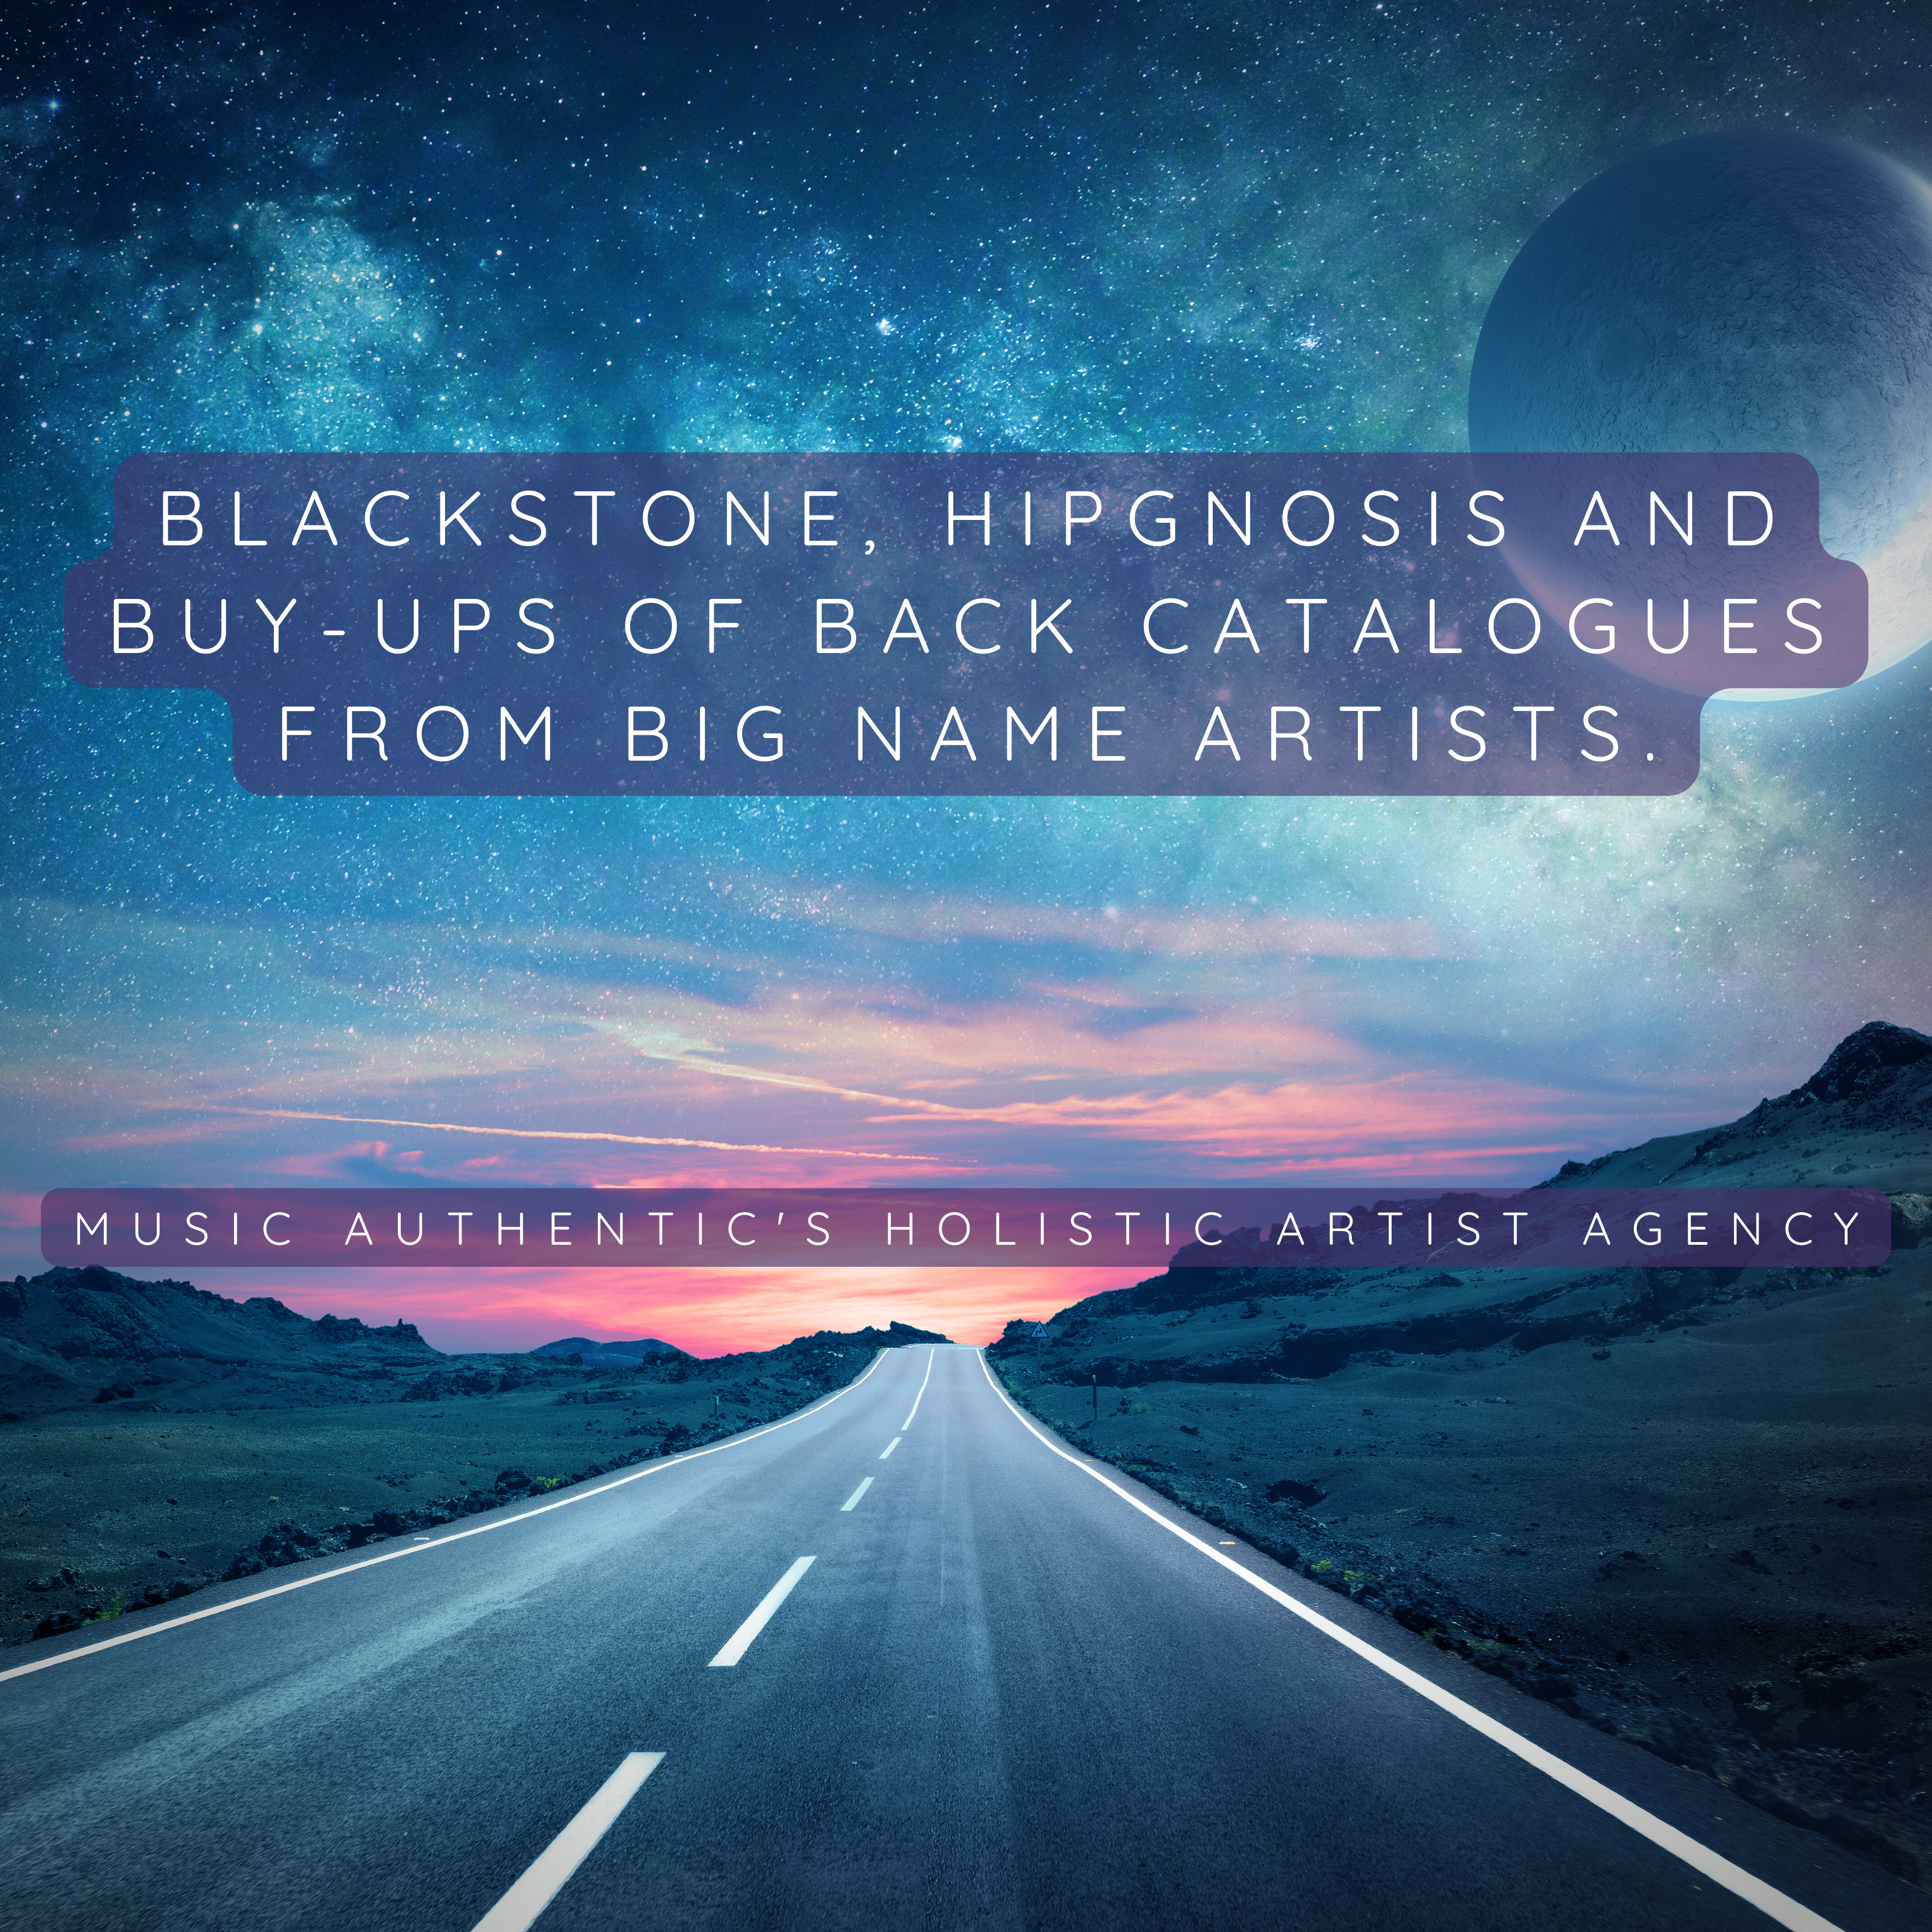 Blackstone, Hipgnosis and buy-ups of back catalogues from big name artists